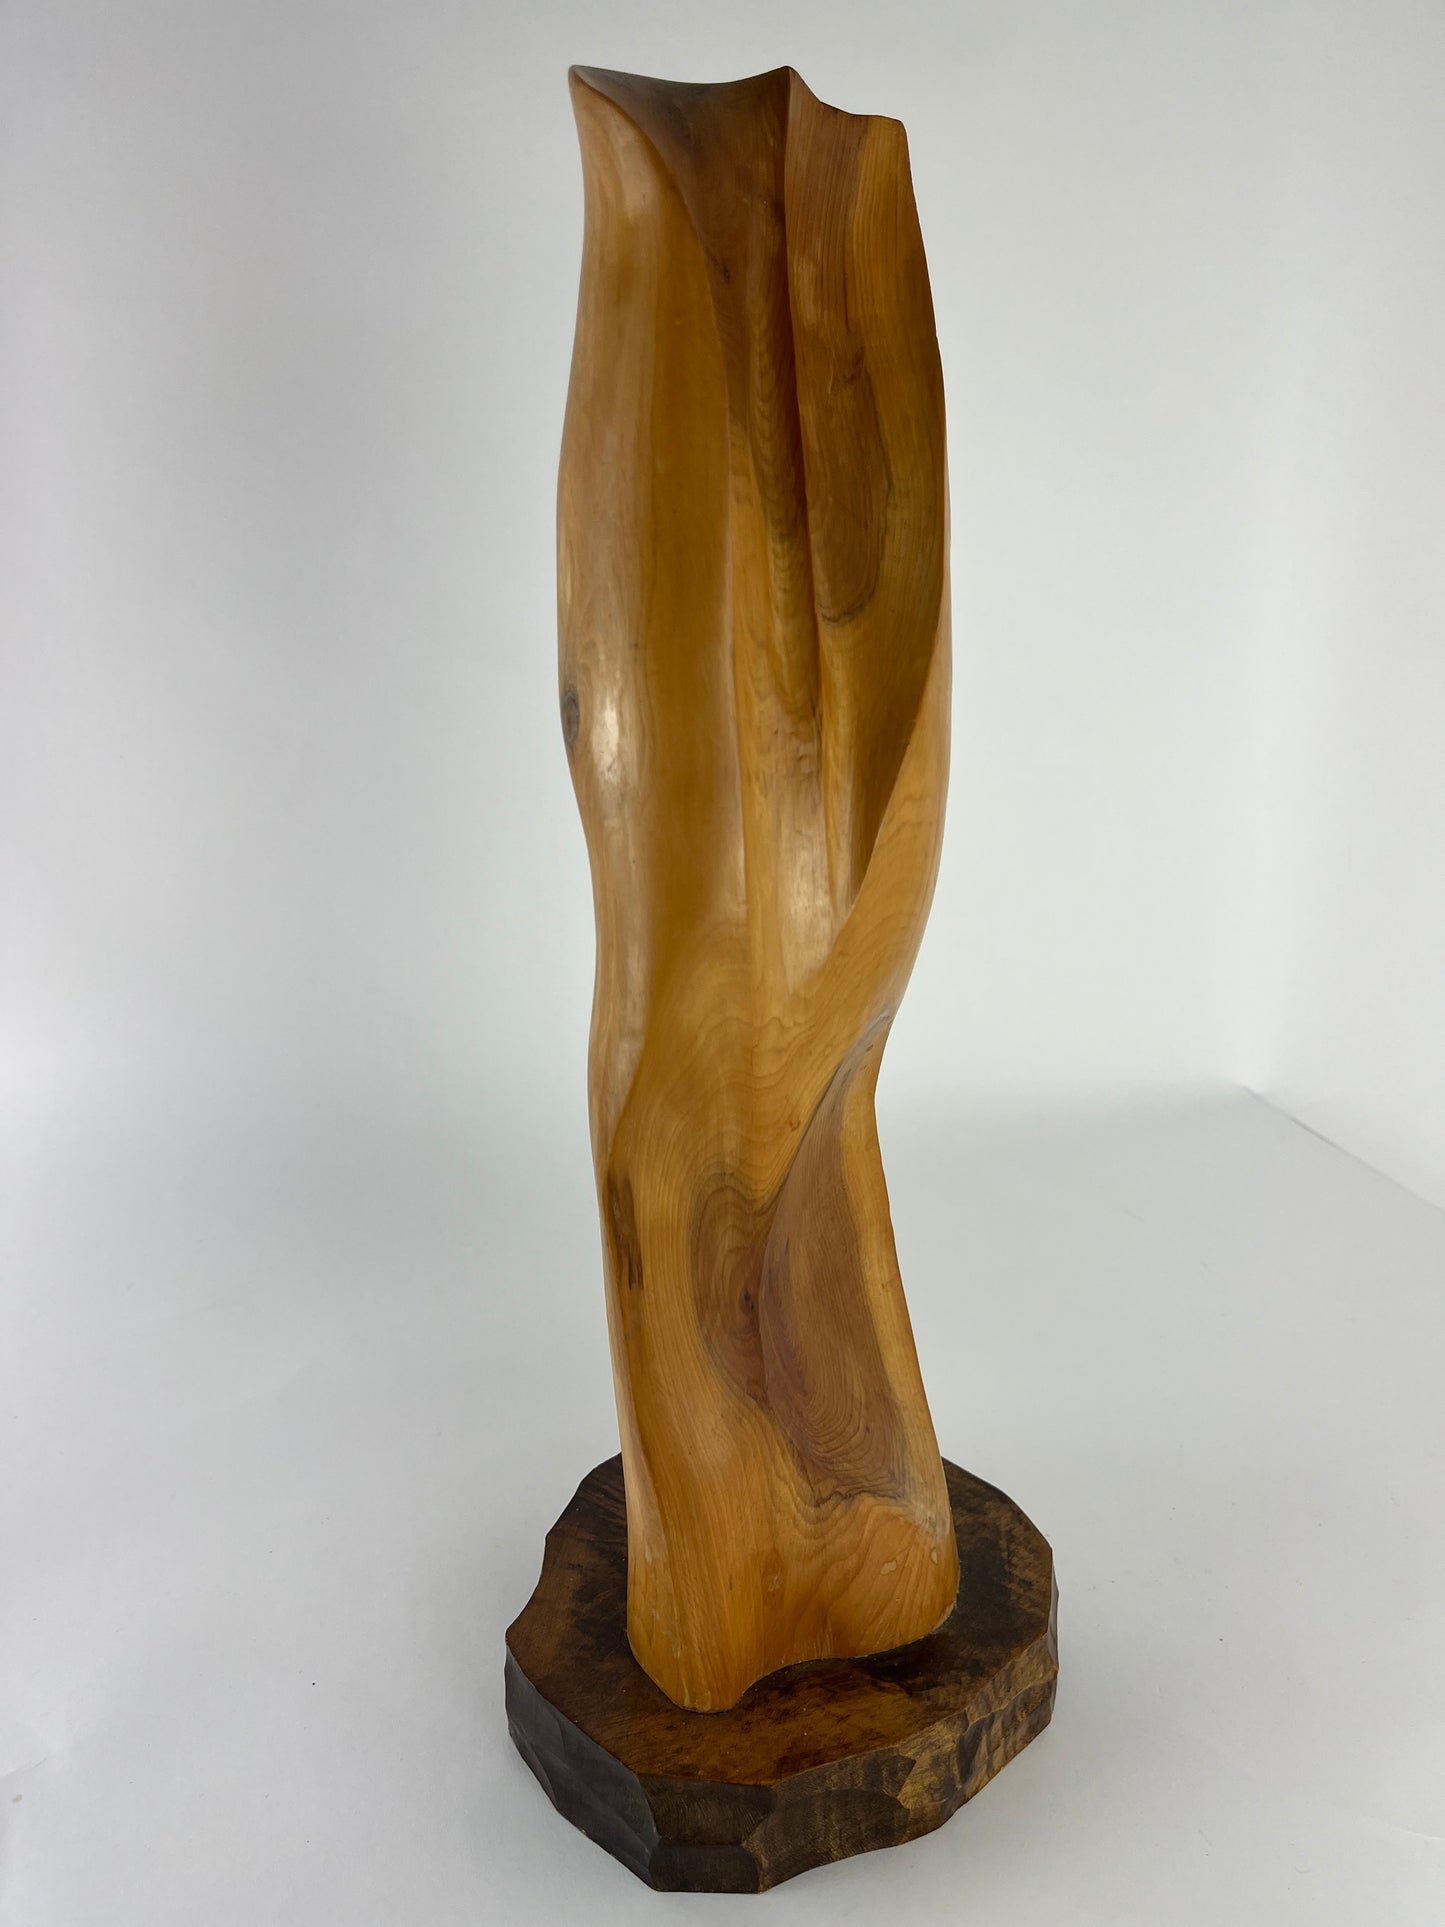 RUSSELL WATSON HANDCRAFTED SYCAMORE SCULPTURE